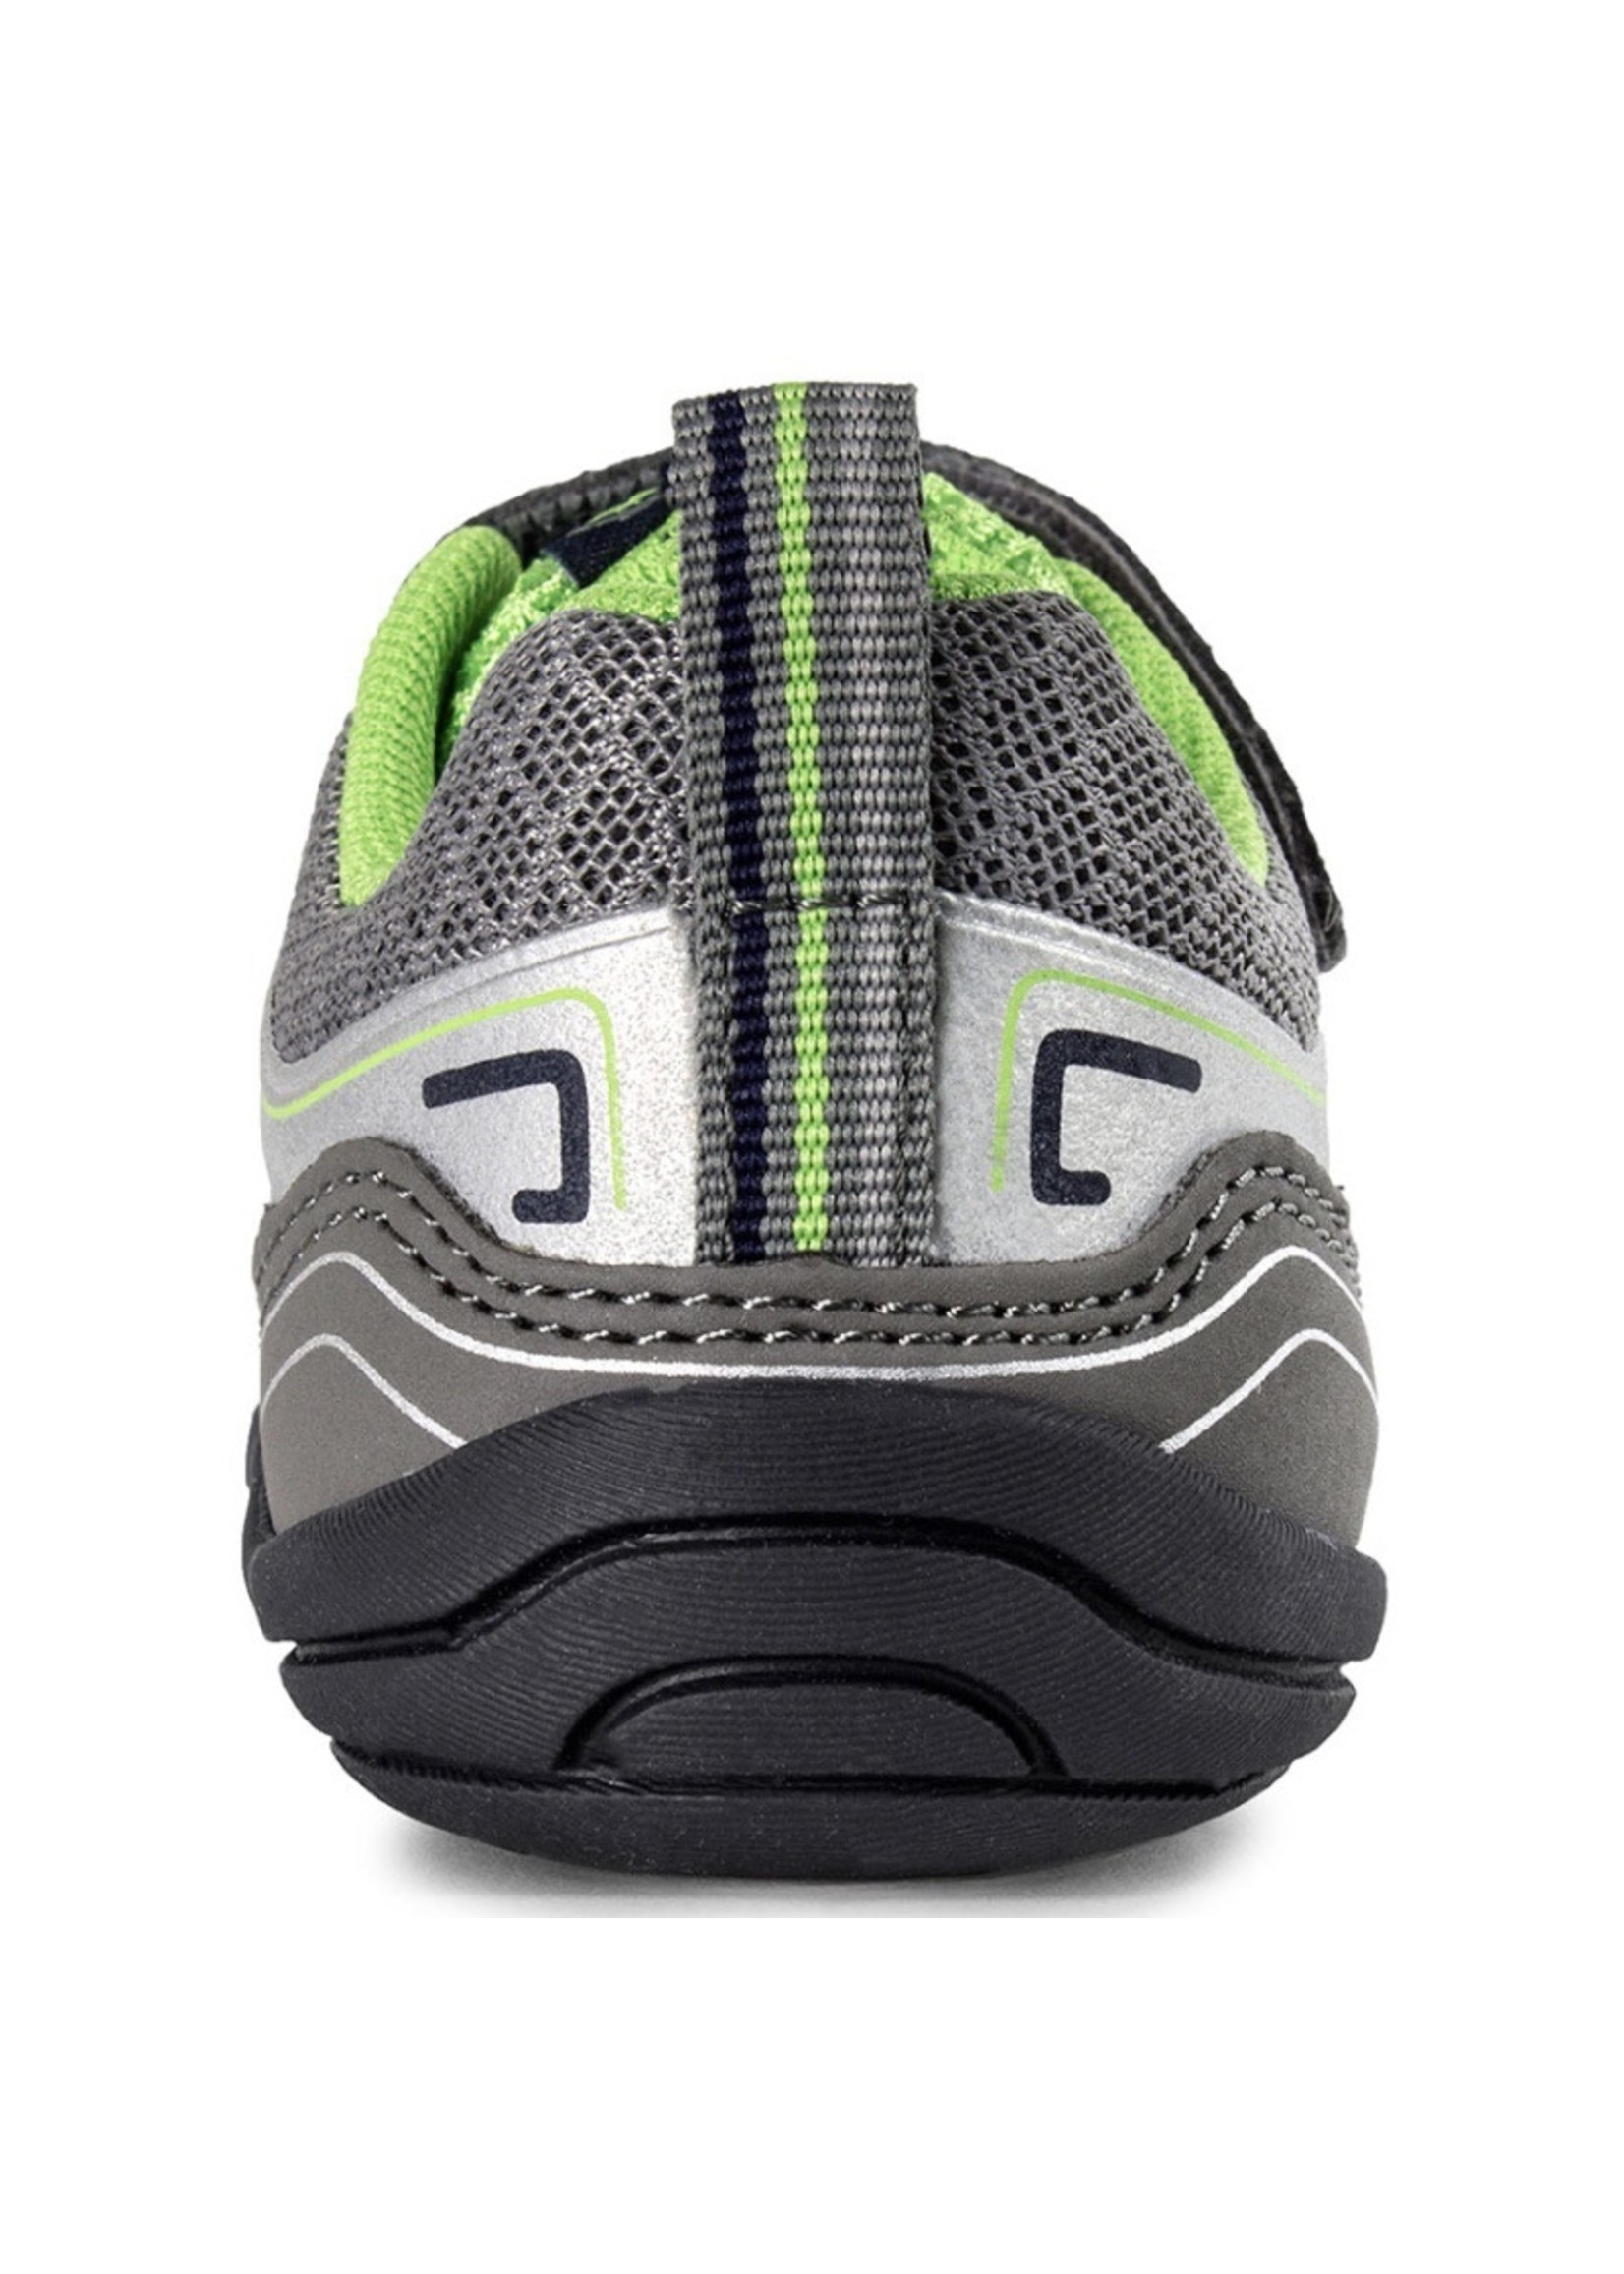 Pediped Pediped Force Silver/Lime